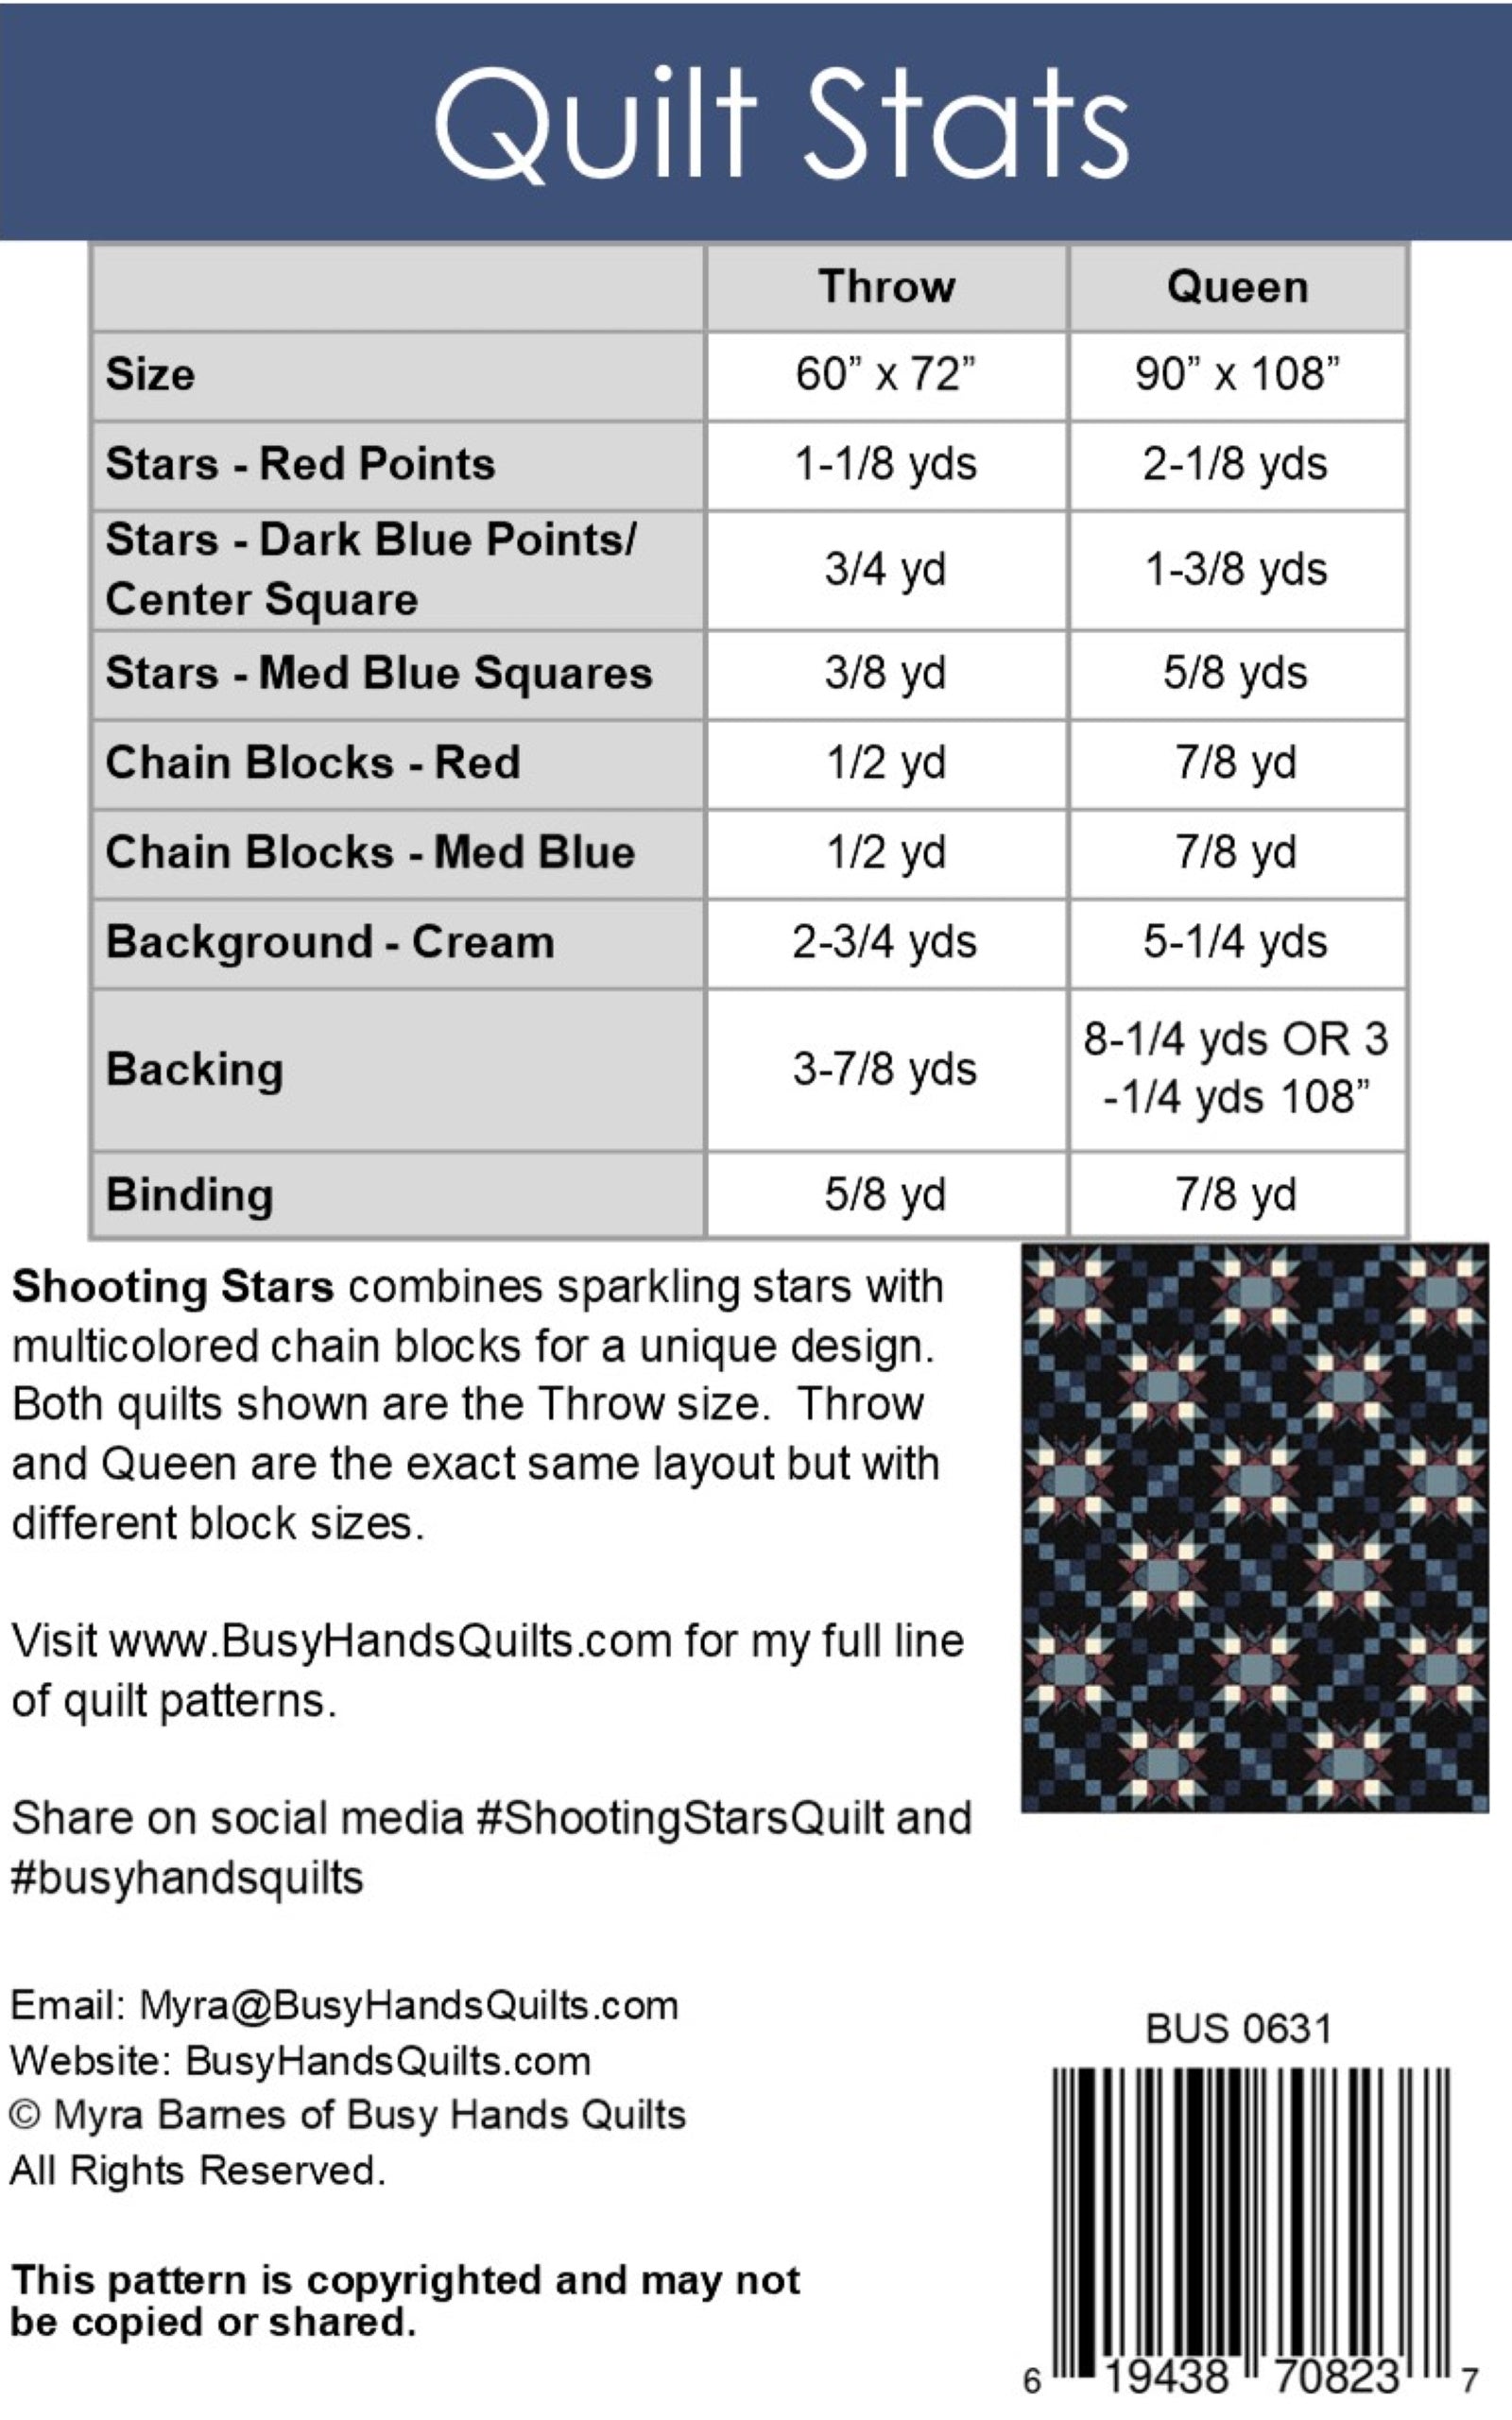 Shooting Stars Quilt Pattern PDF DOWNLOAD Busy Hands Quilts $12.99